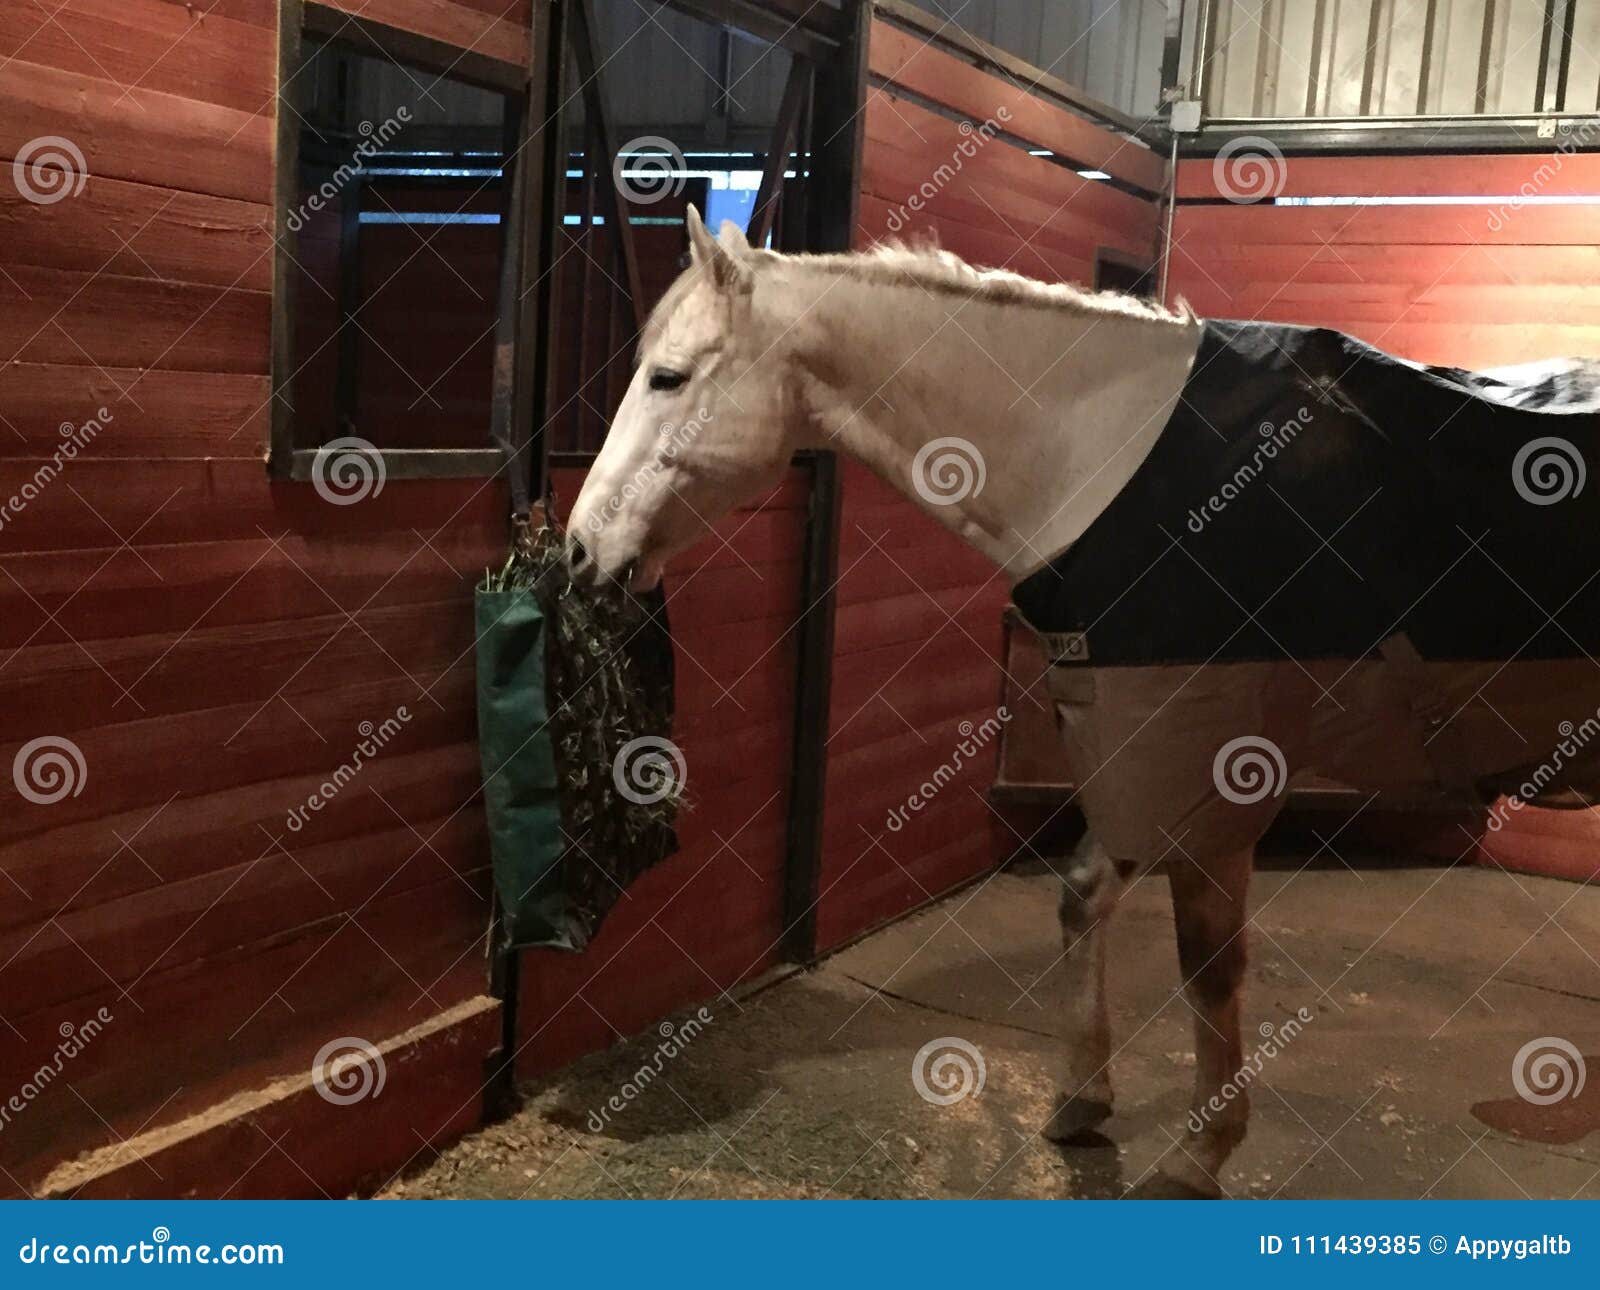 gray american quarter horse gelding inside barn with rubber mats and cherry wood stalls